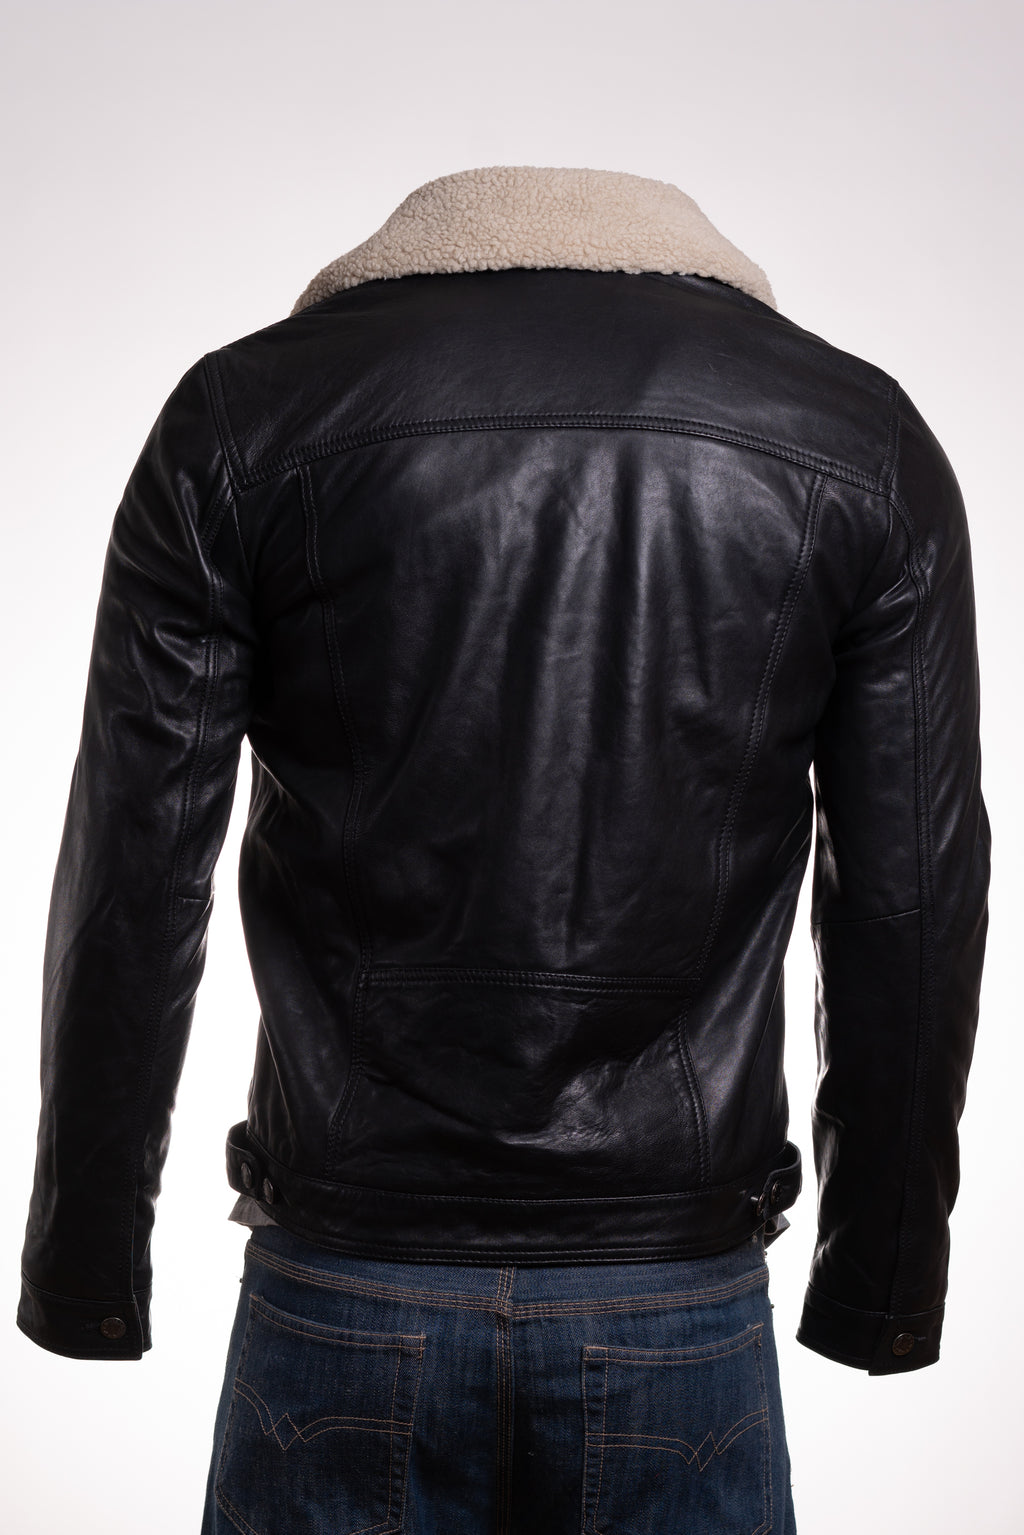 Men's Black Shirt Style Leather Jacket With Removable Sheepskin Collar: Gabriele